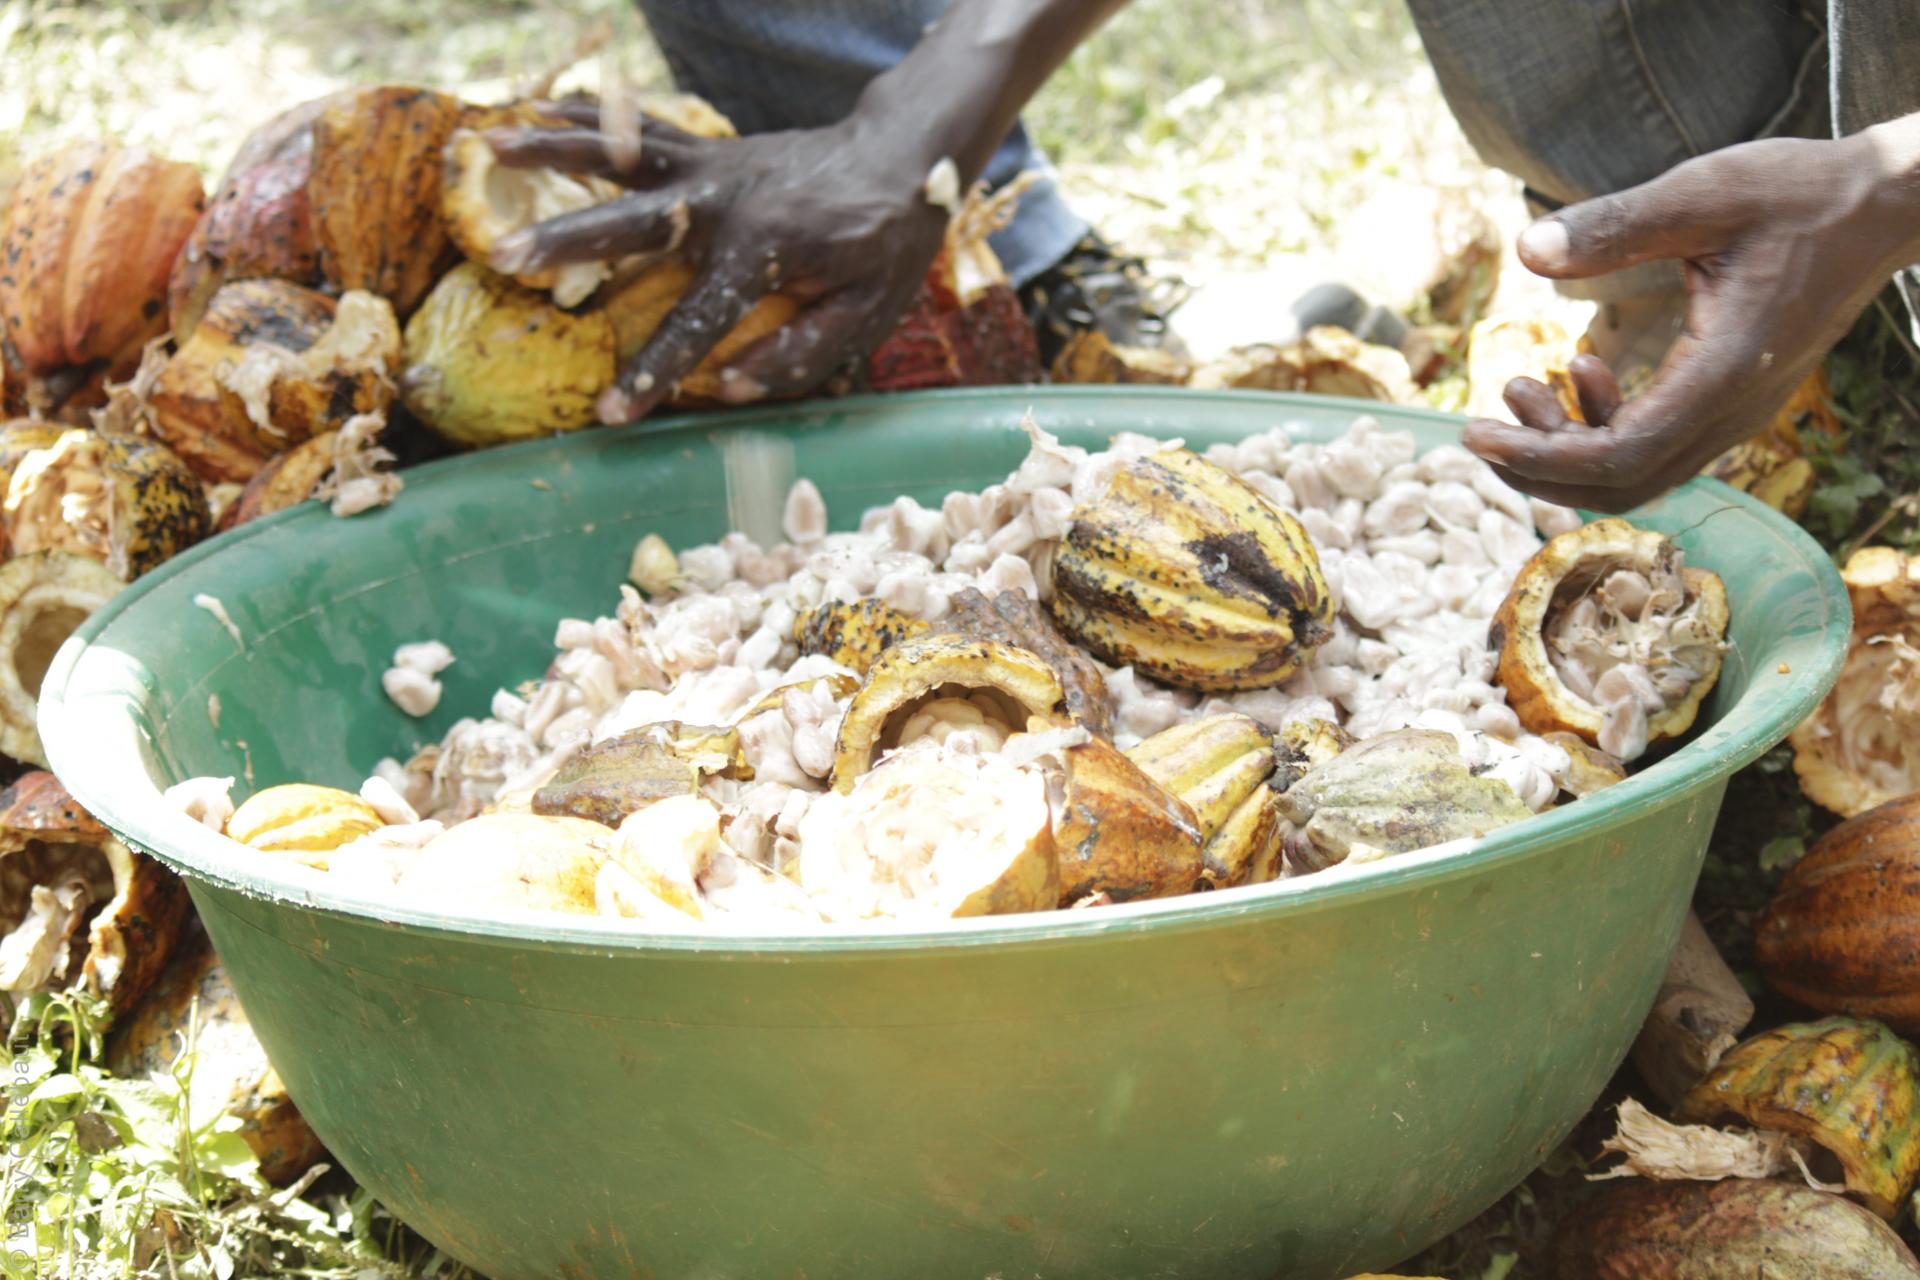 Farmers cleaning cocoa beans